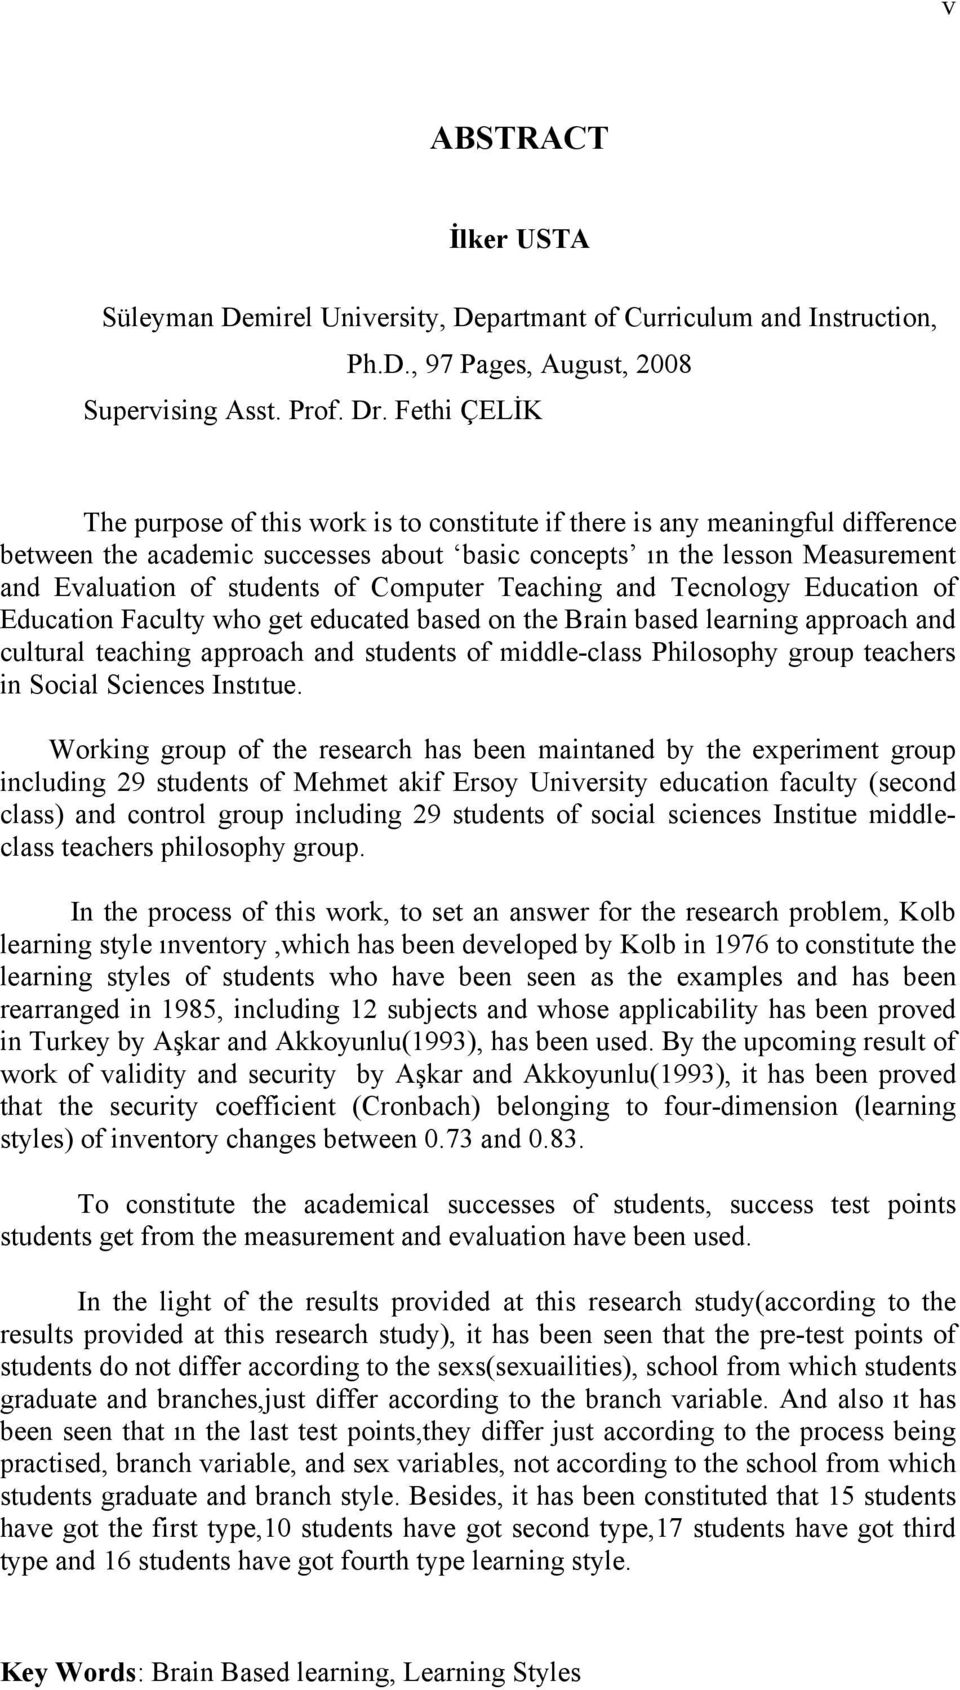 Computer Teaching and Tecnology Education of Education Faculty who get educated based on the Brain based learning approach and cultural teaching approach and students of middle-class Philosophy group